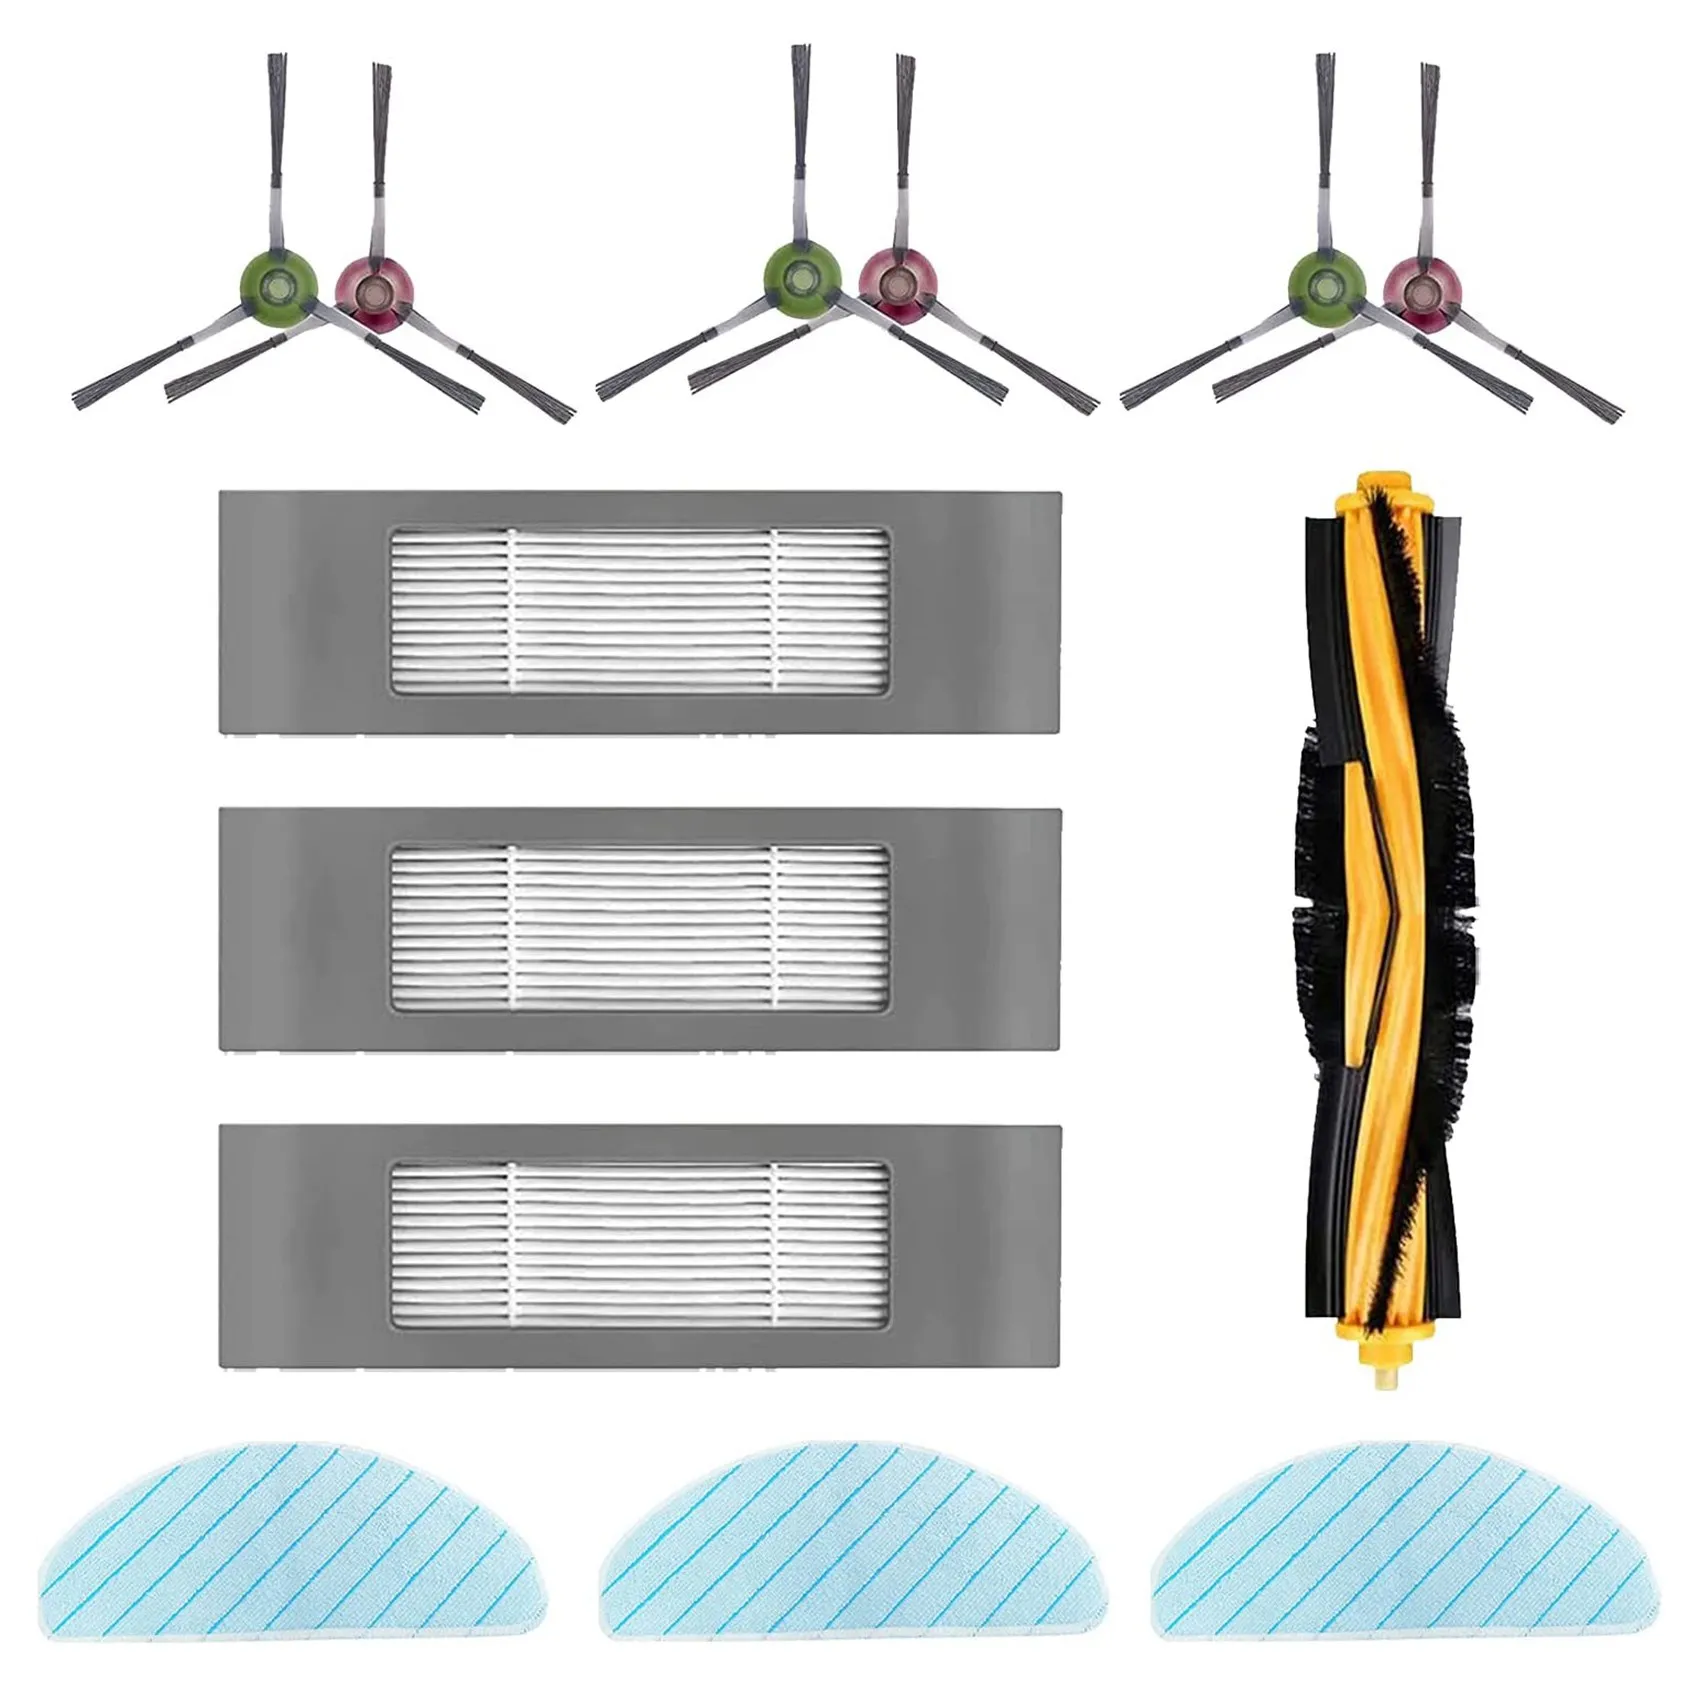 

Cleaning Cloth Brush Filter Accessories Replacement Part Set for Ecovacs DEEBOT OZMO T9 T9+ T9Power T9Max Vacuum Cleaner